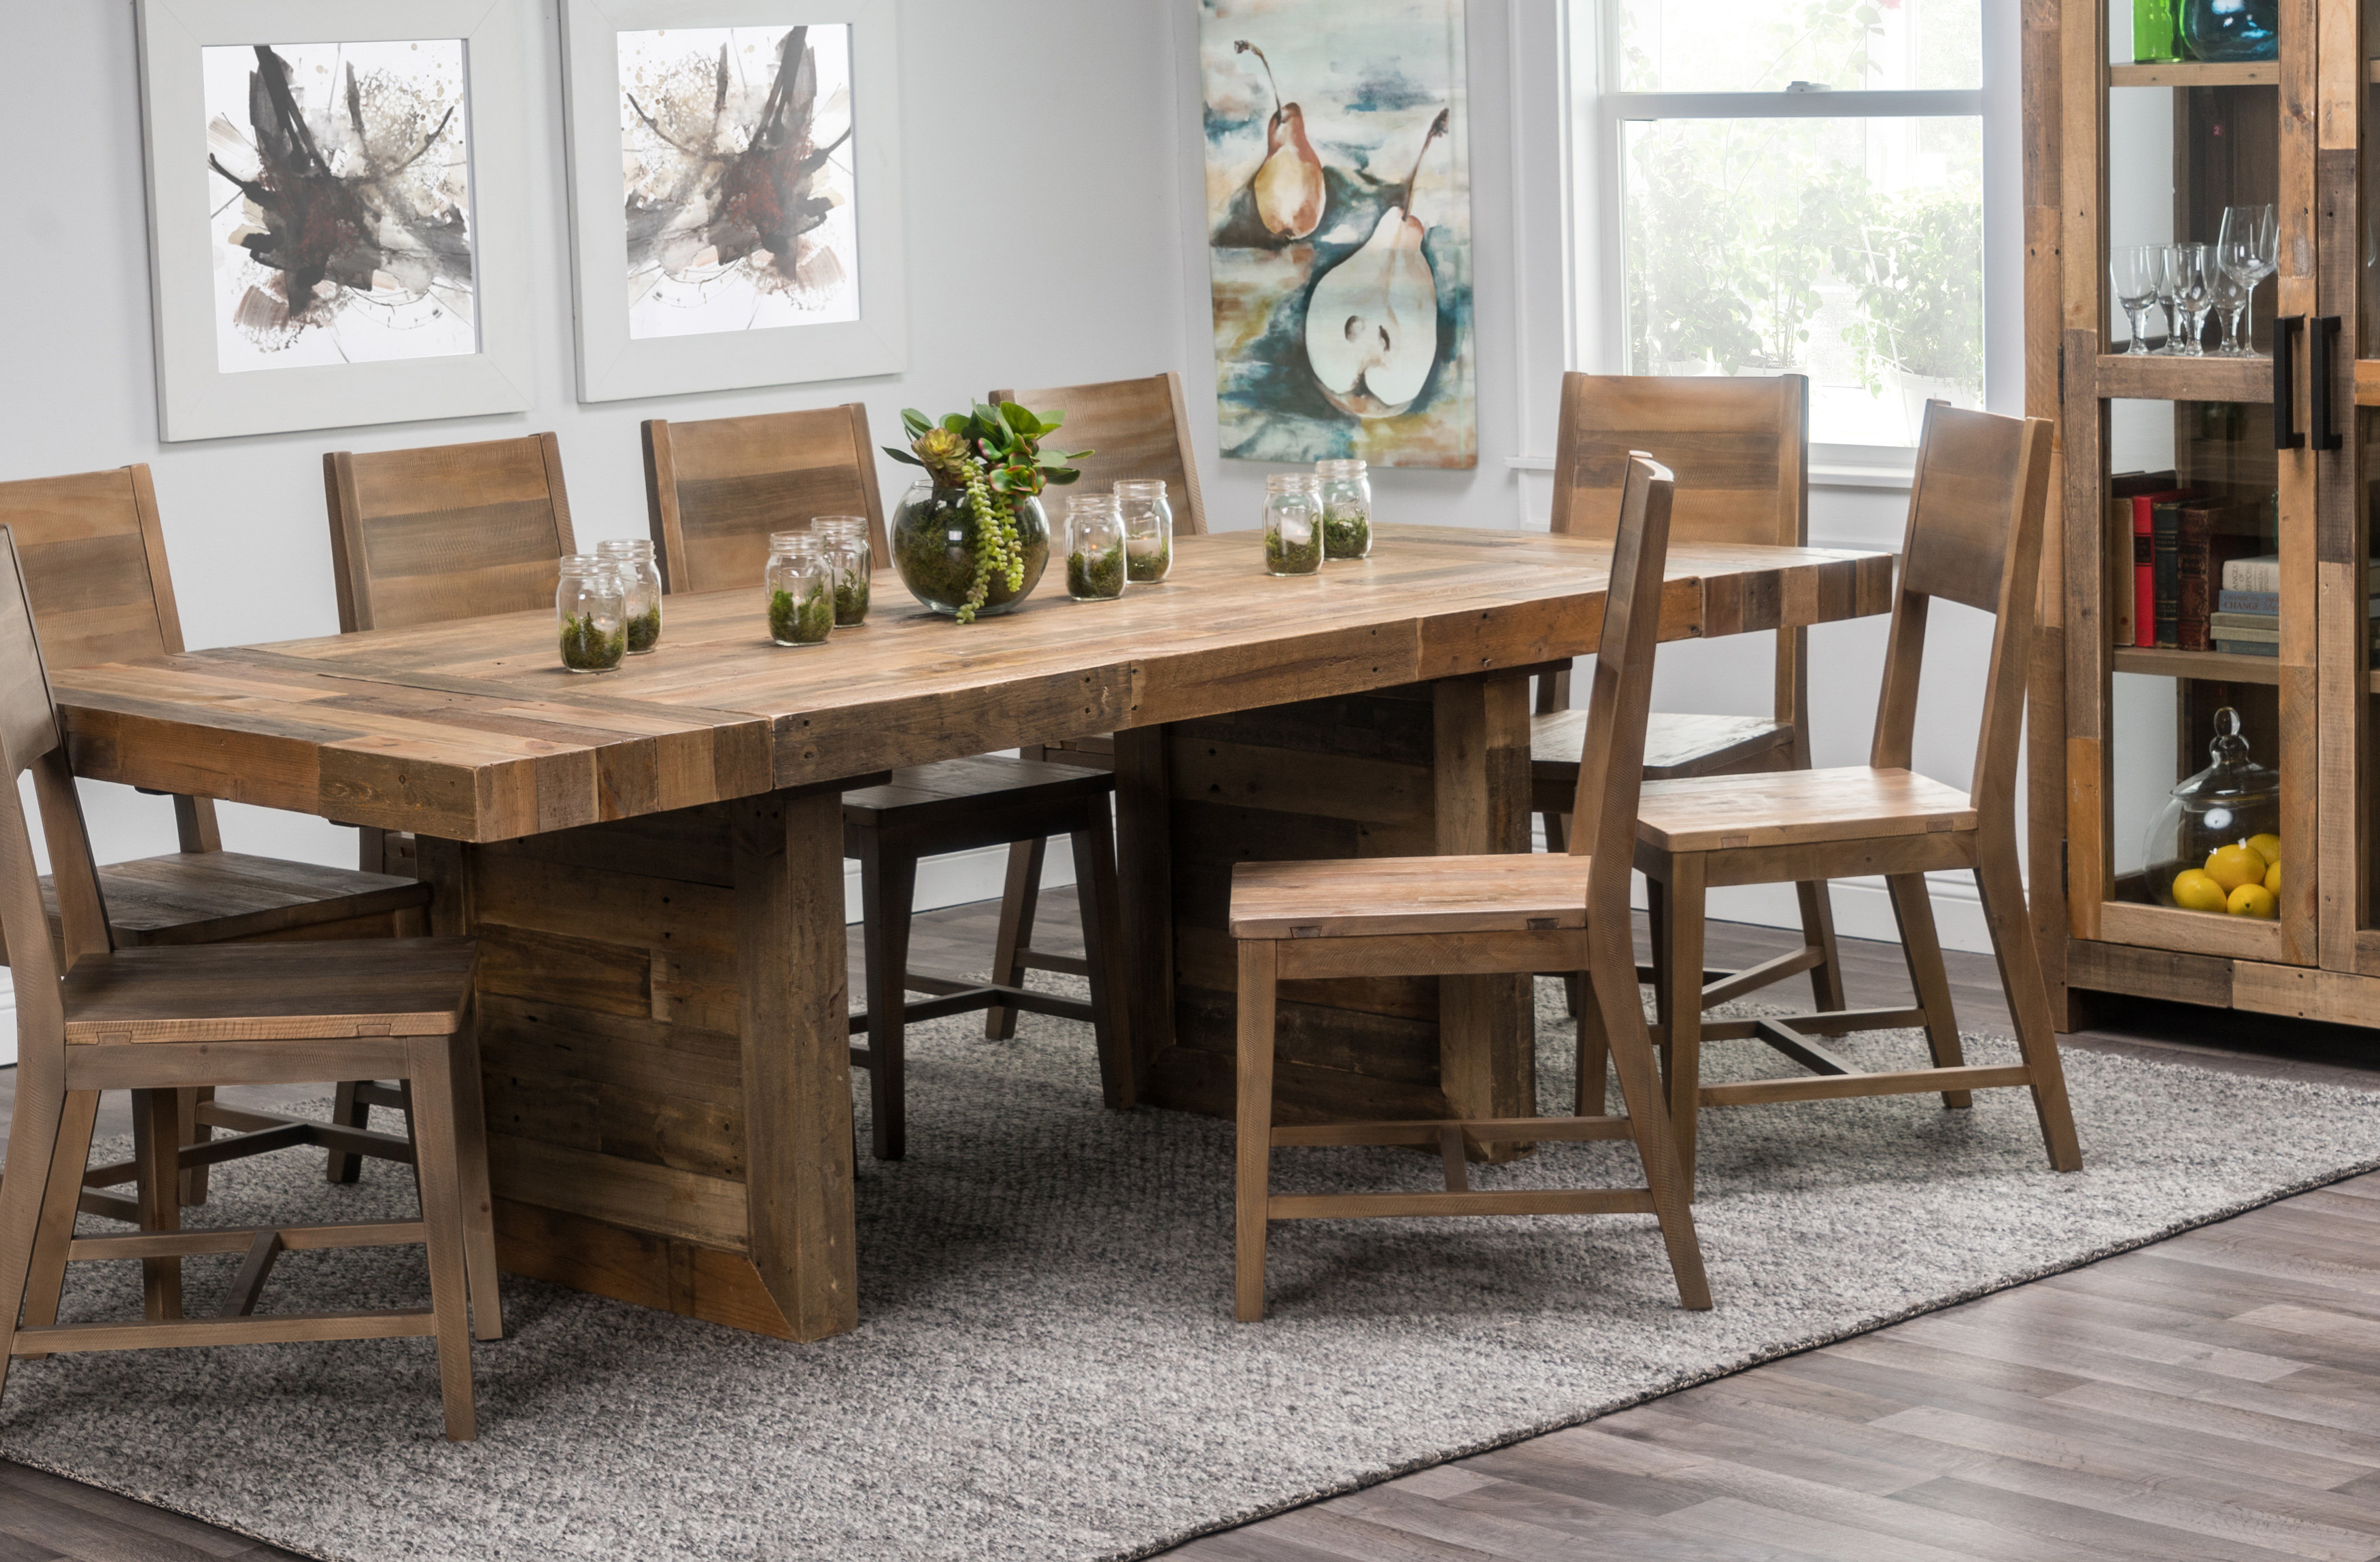 Wooden Dining Tables stock illustrations